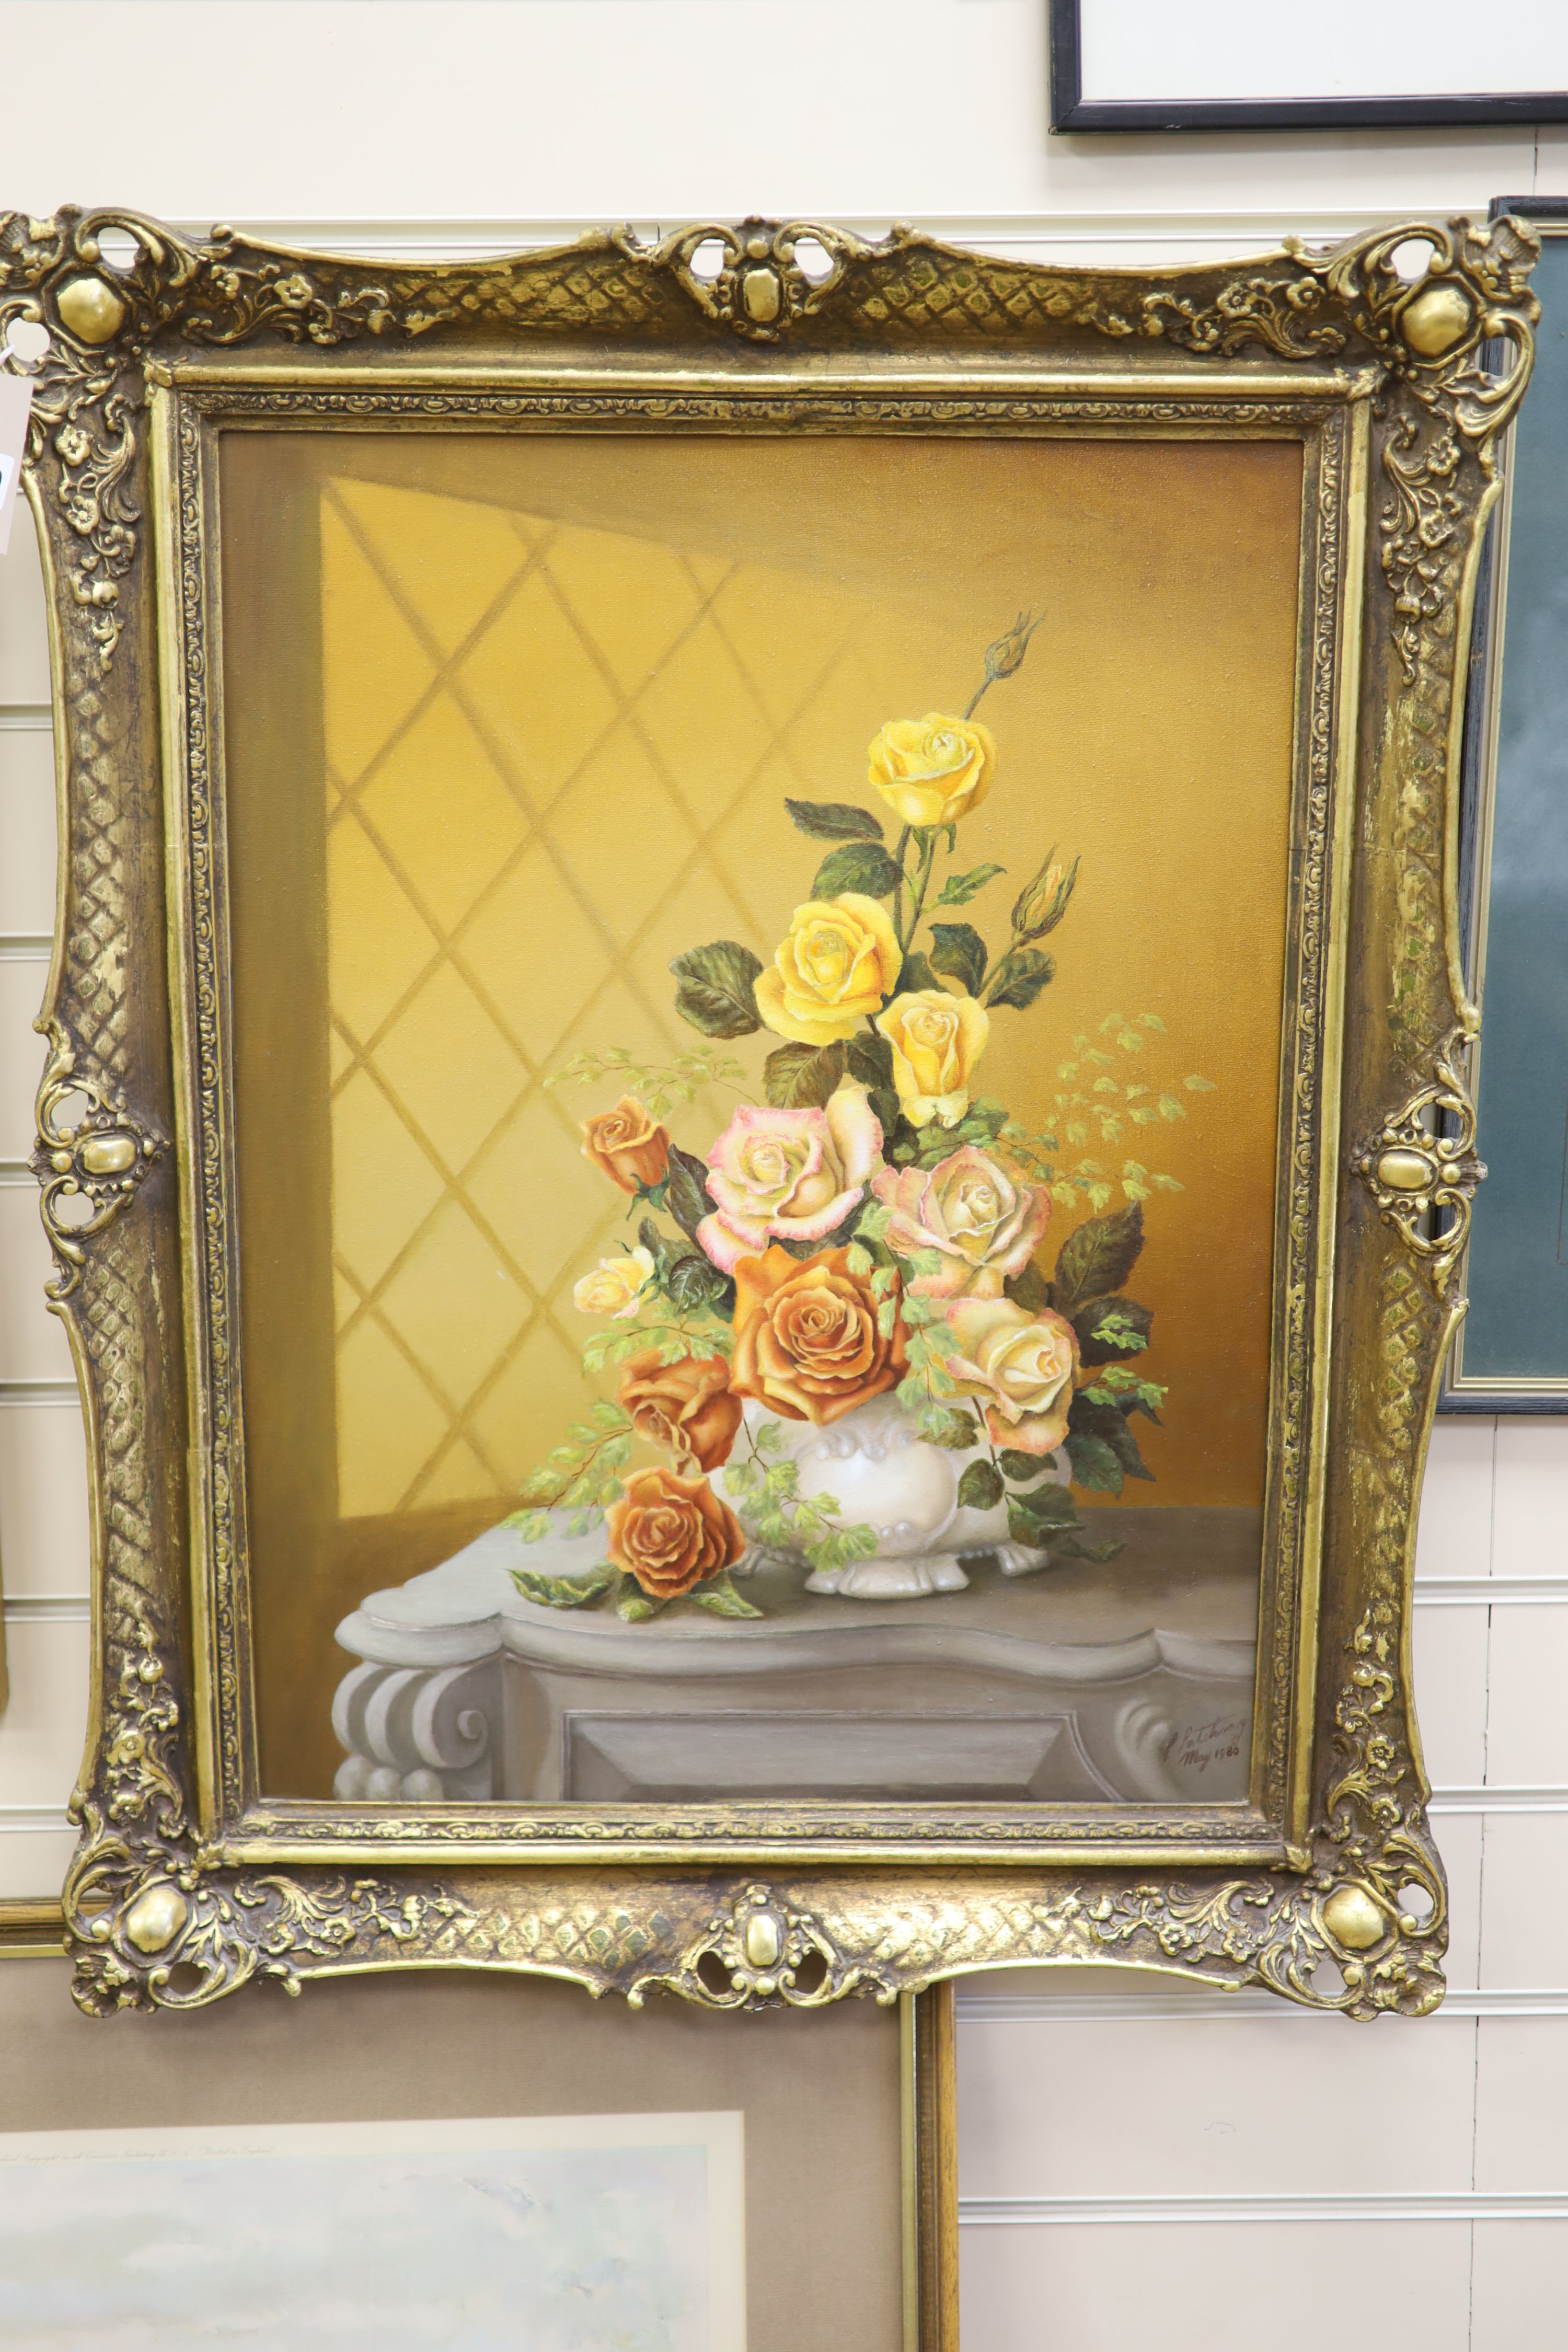 P. Patching, Still life of roses in a vase on a mantelpiece, indistinctly signed, oil on canvas, 60 x 45cm